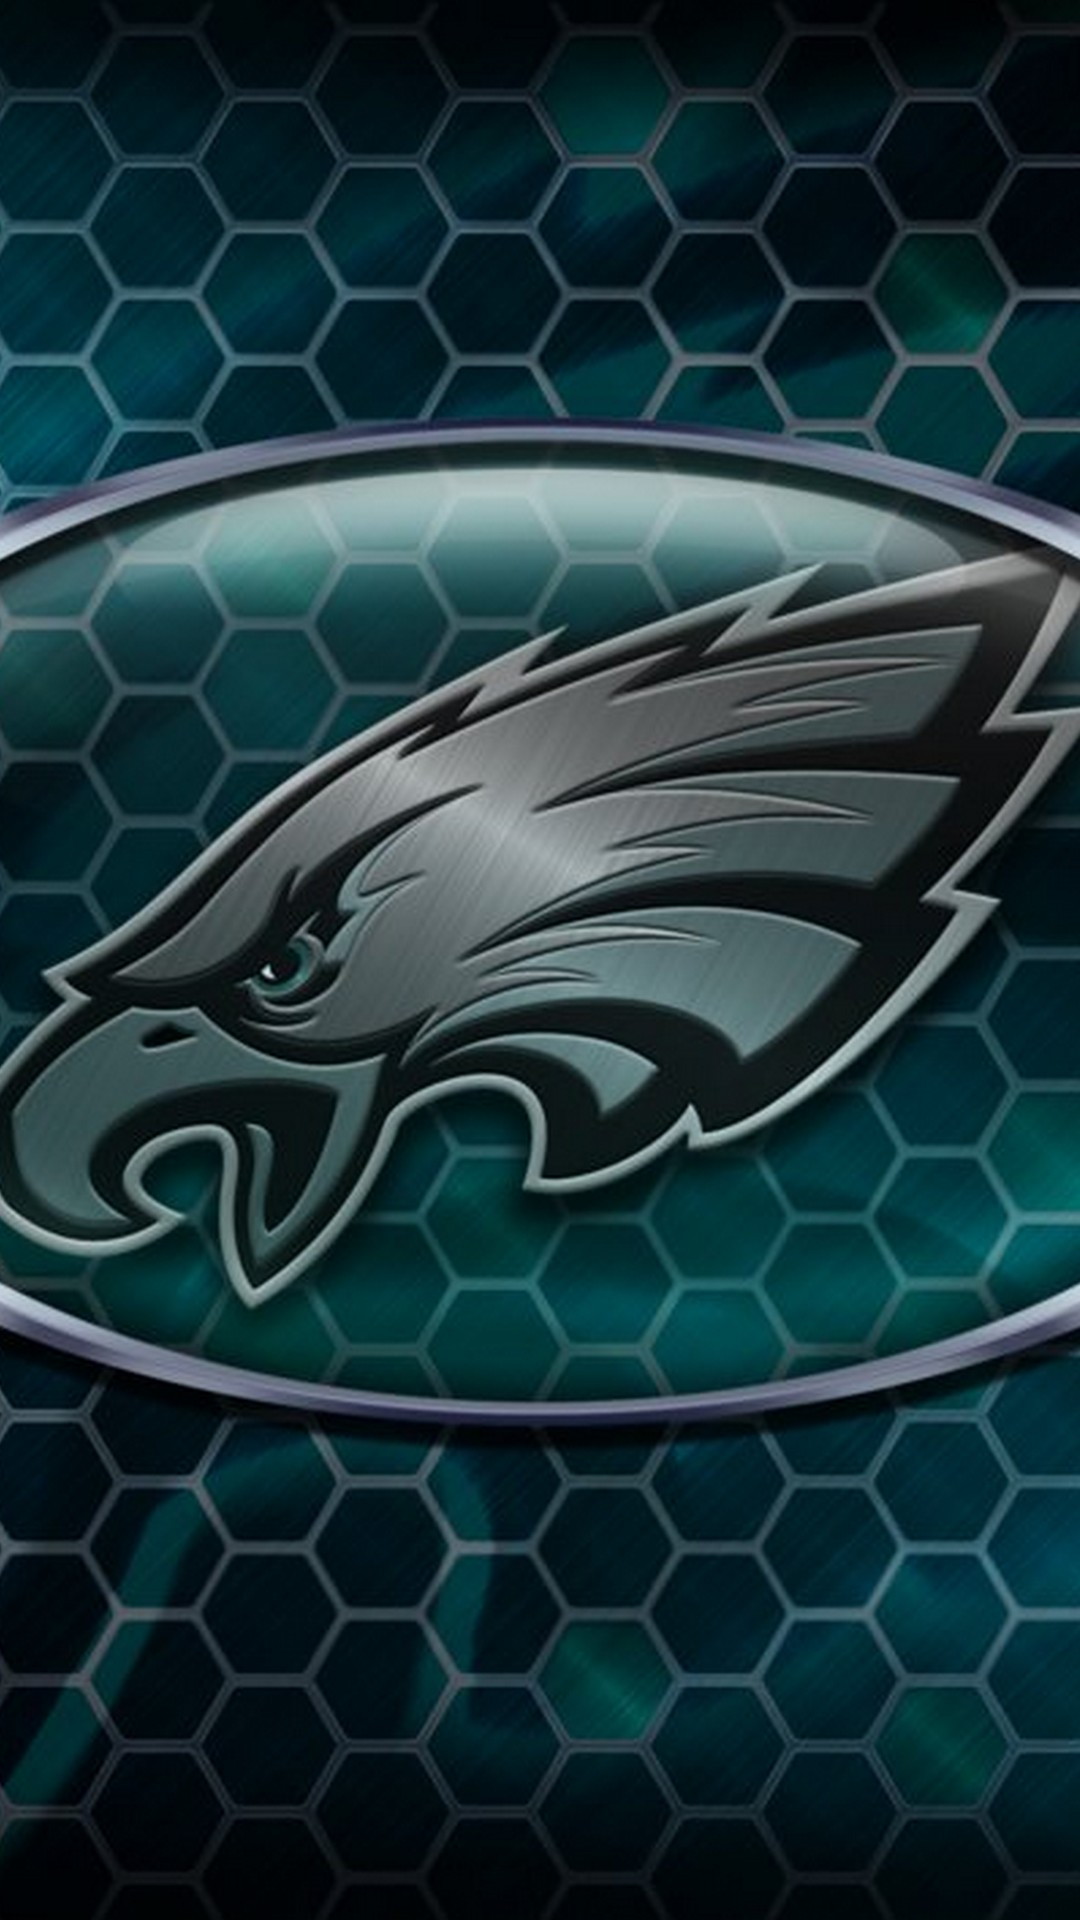 Philadelphia Eagles iPhone Wallpaper New with high-resolution 1080x1920 pixel. Donwload and set as wallpaper for your iPhone X, iPhone XS home screen backgrounds, XS Max, XR, iPhone8 lock screen wallpaper, iPhone 7, 6, SE and other mobile devices